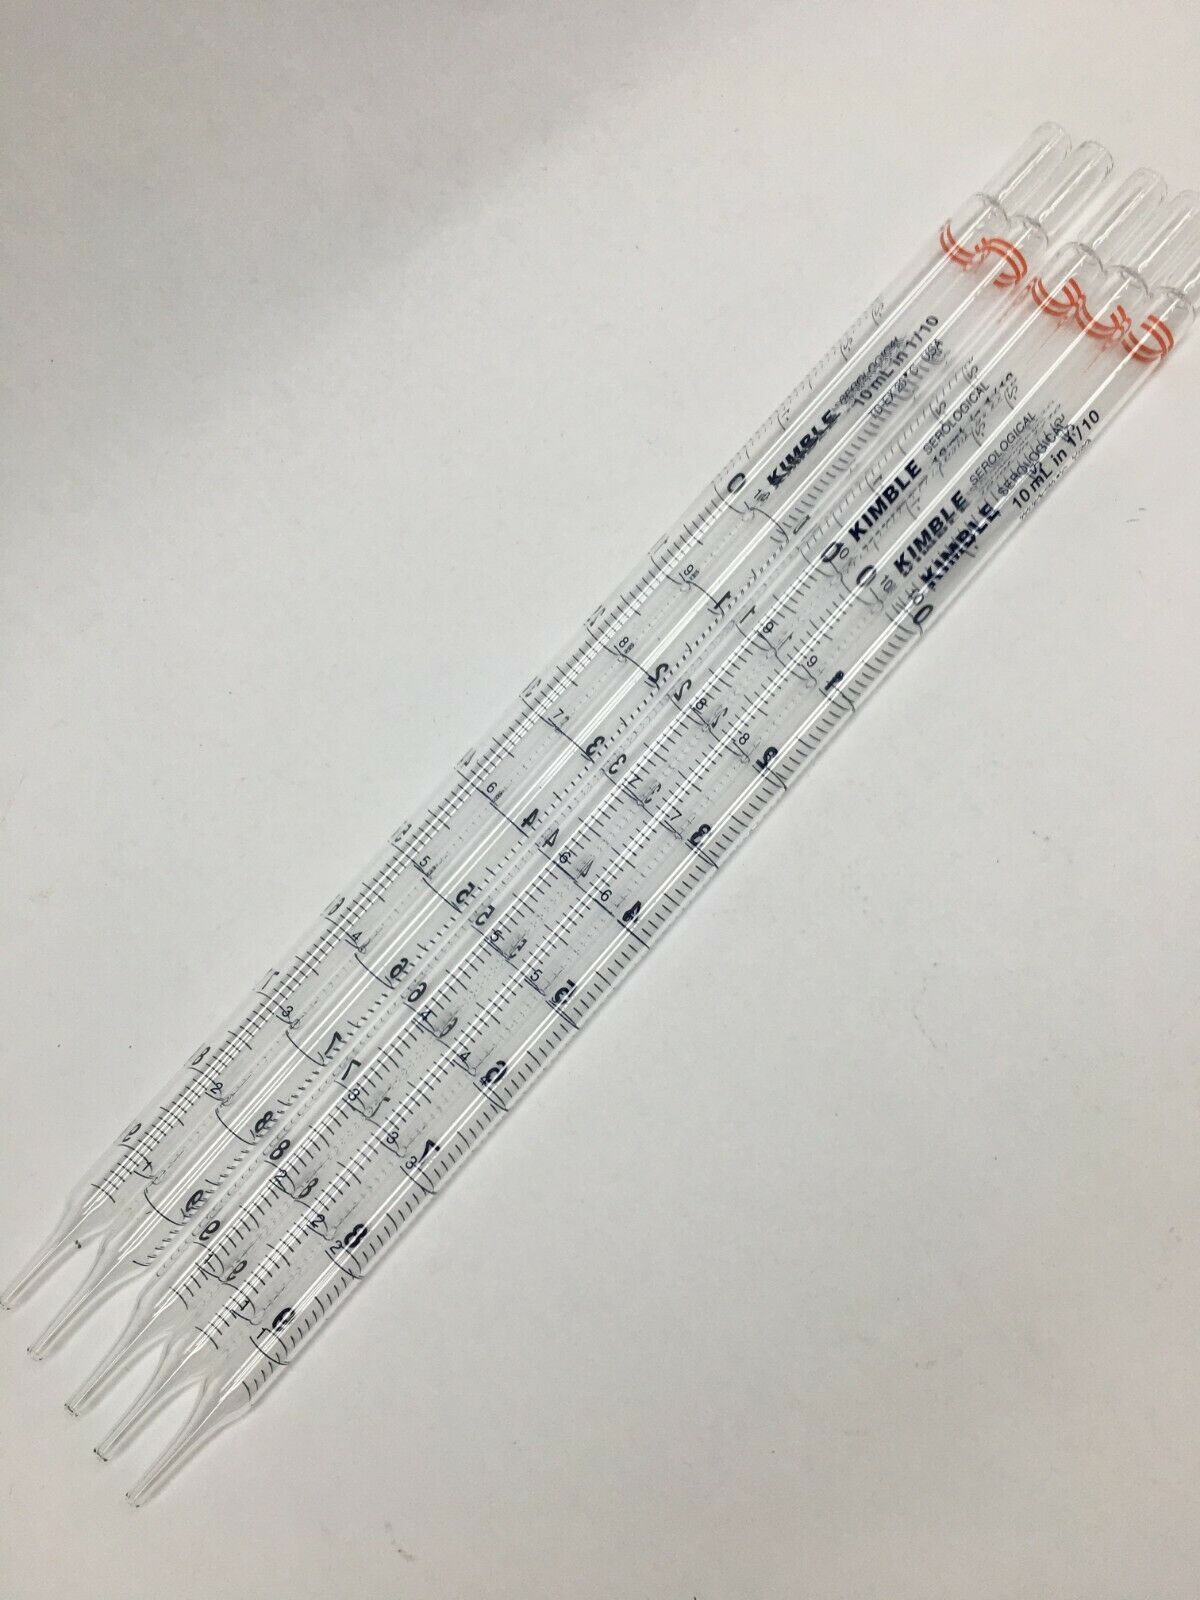 Primary image for Lot of 5 Kimble NonSterile 10mL x 1/10 Serological Glass Pipette 72120 10110 USA